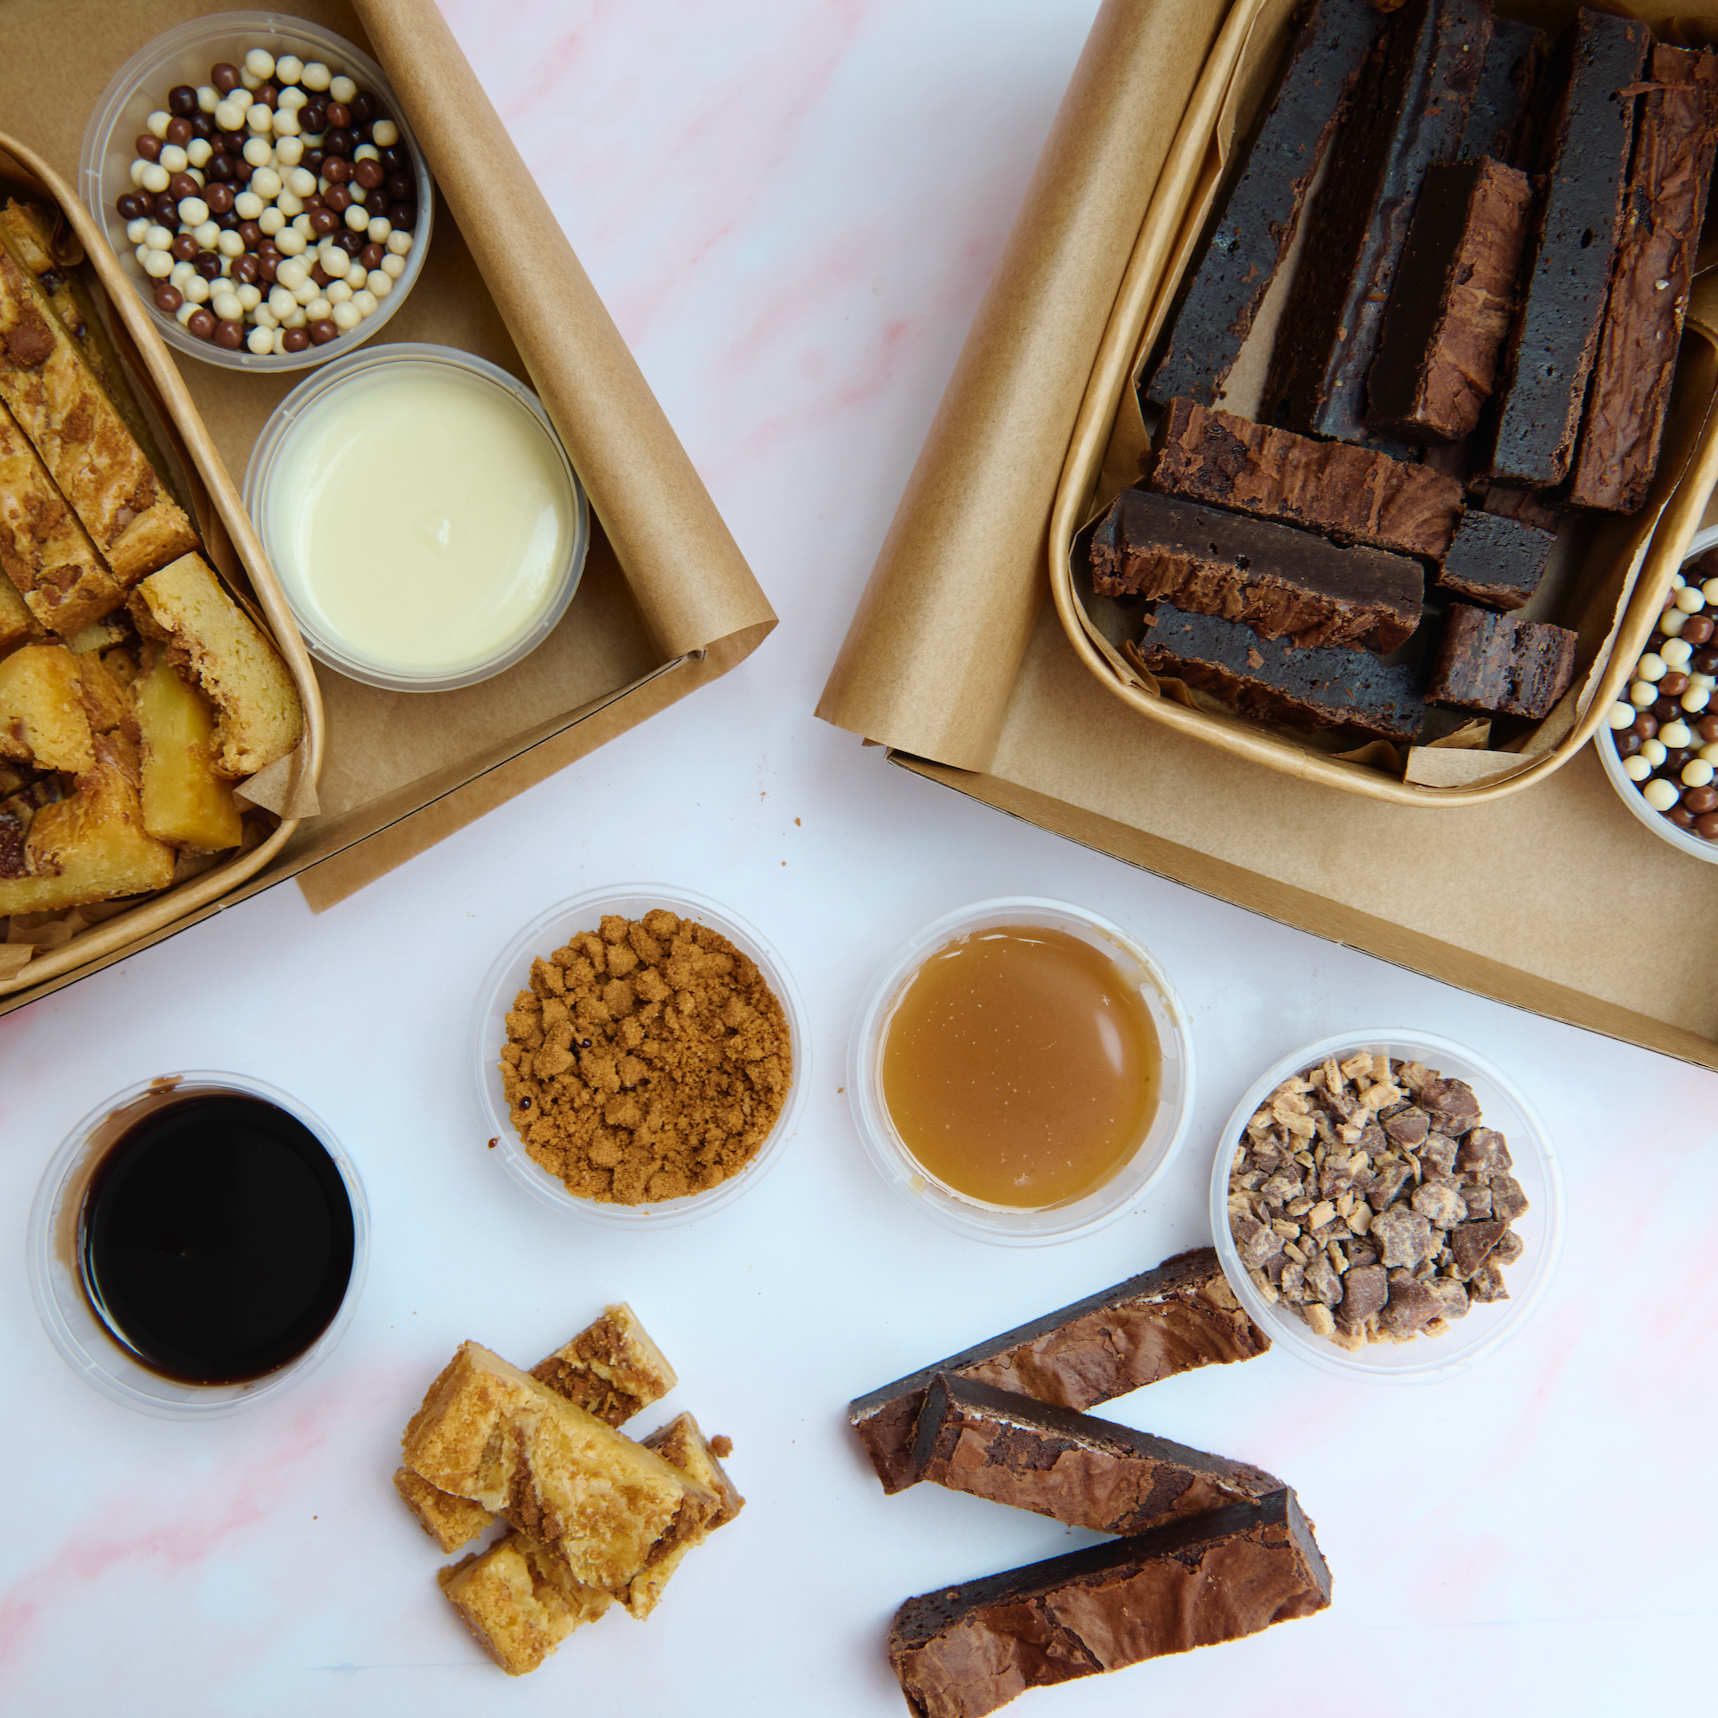 The Brownie Box UK Postal Ultimate Brownie and Blondie Dipping Box Posted Nationwide. Contains Brownies, Blondies, Dipping Sauces &amp; Chocolate Crumb.